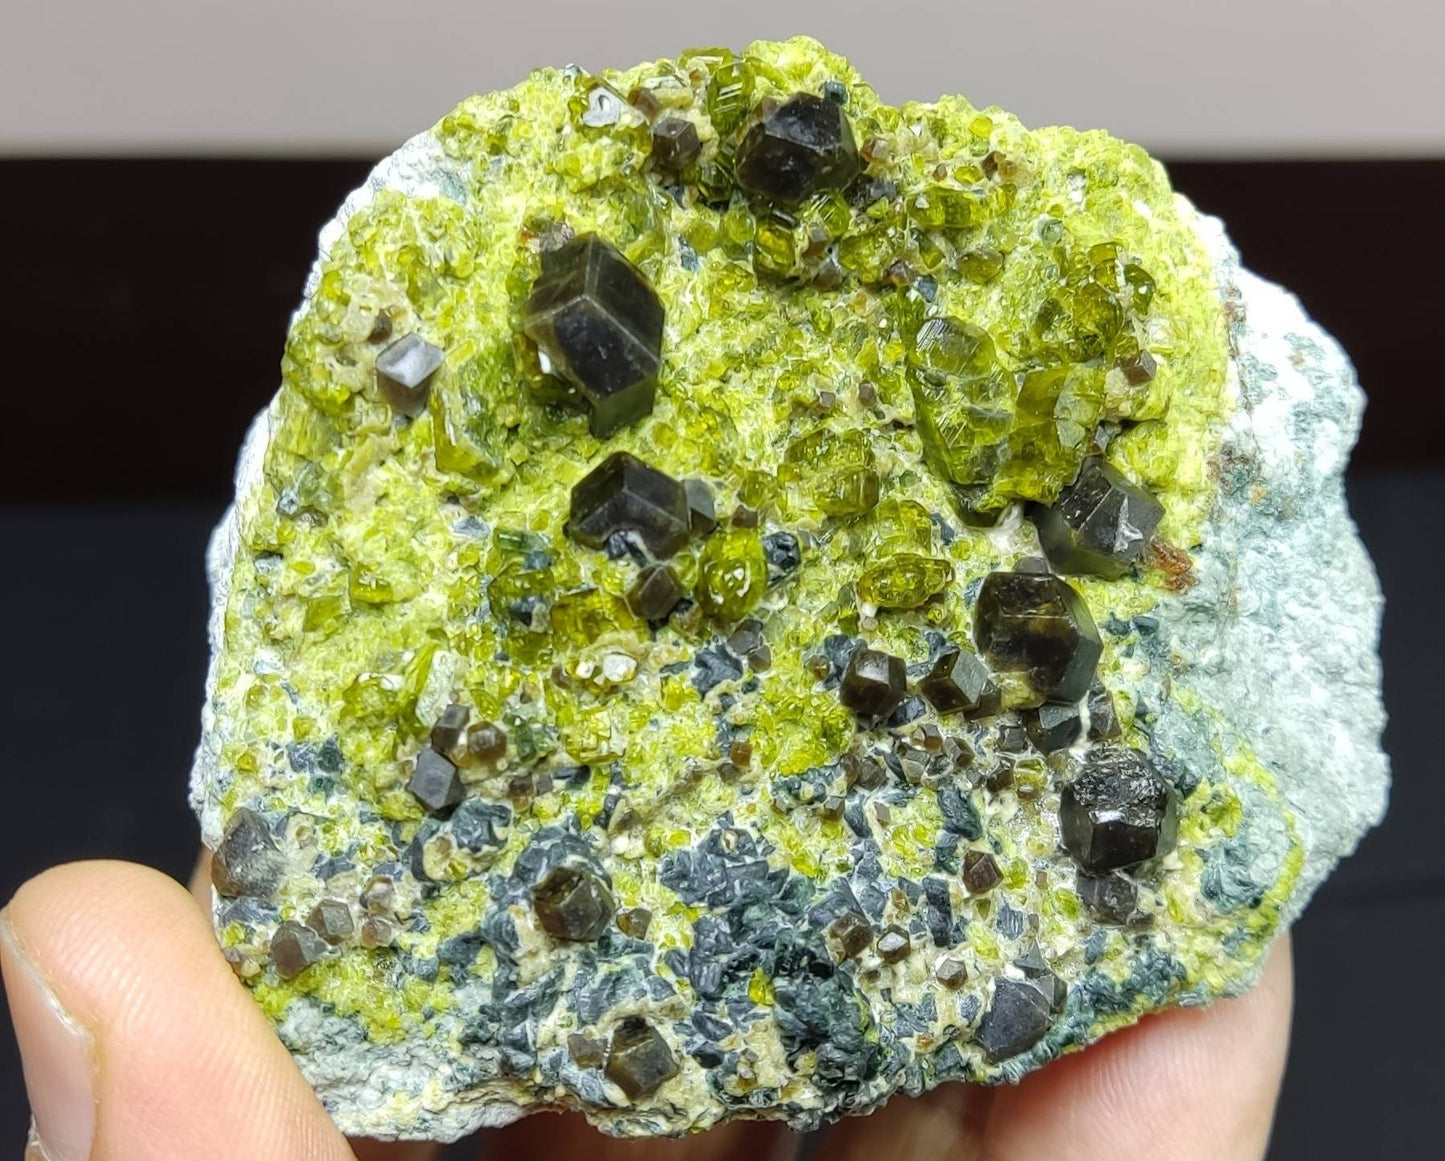 Andradite garnet crystals on matrix with epidote an aesthetic specimen 302 grams